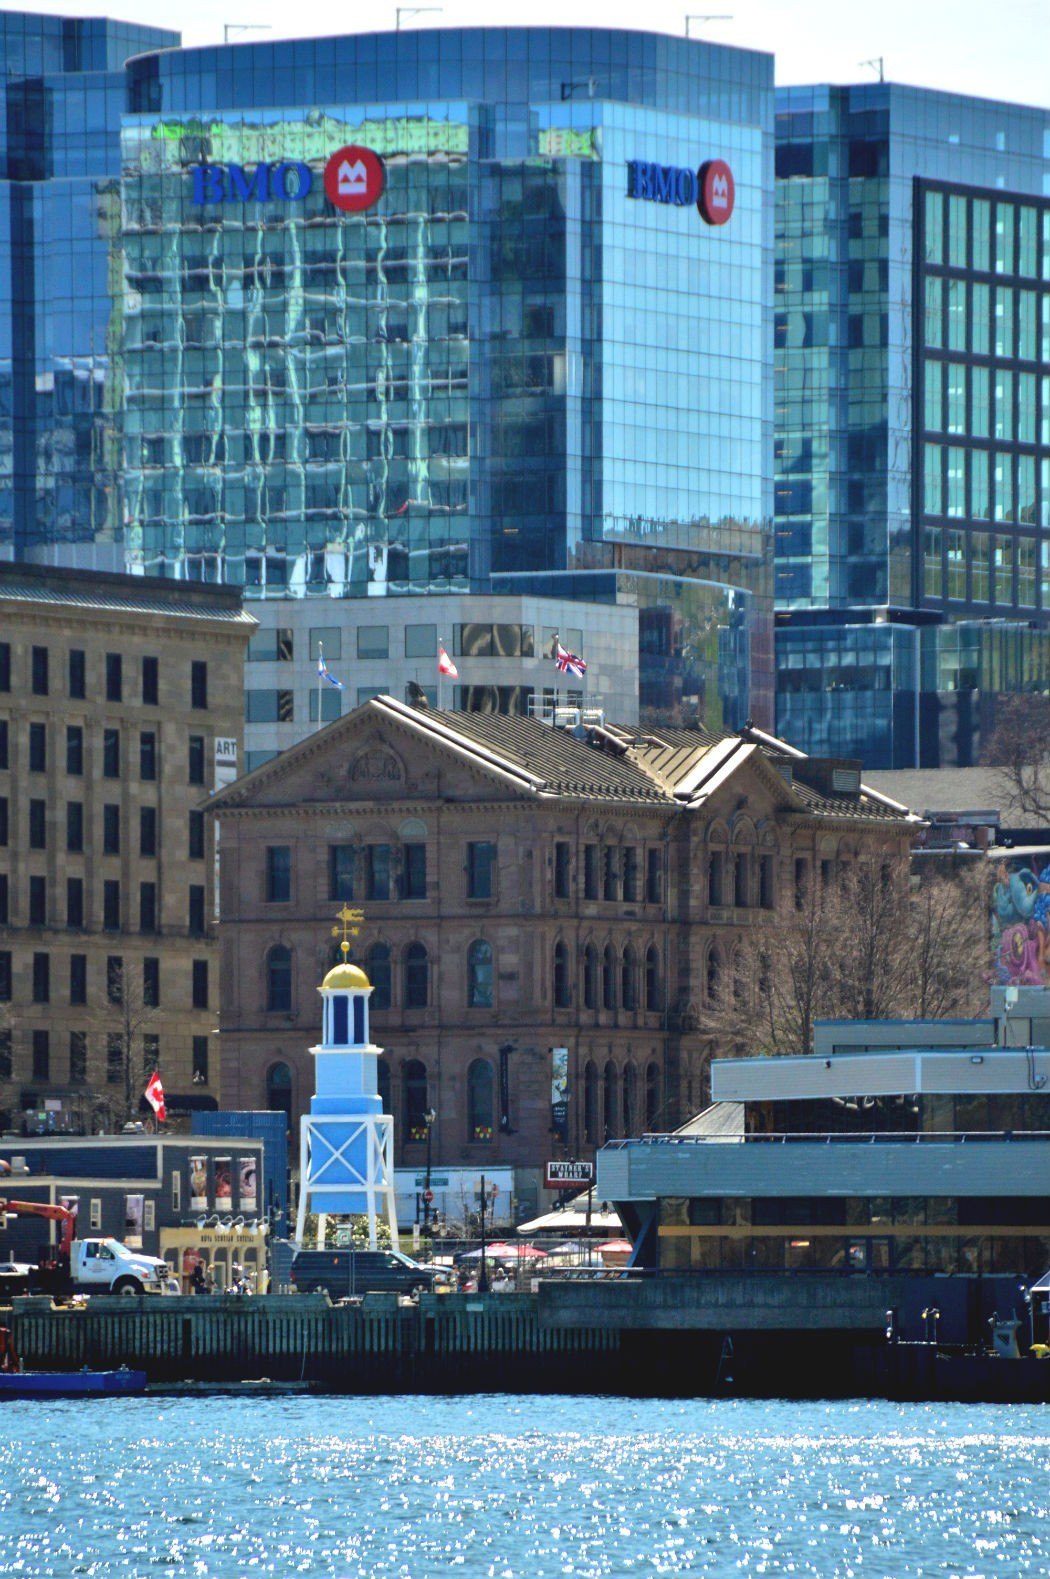 Downtown Halifax as seen from the waterfront